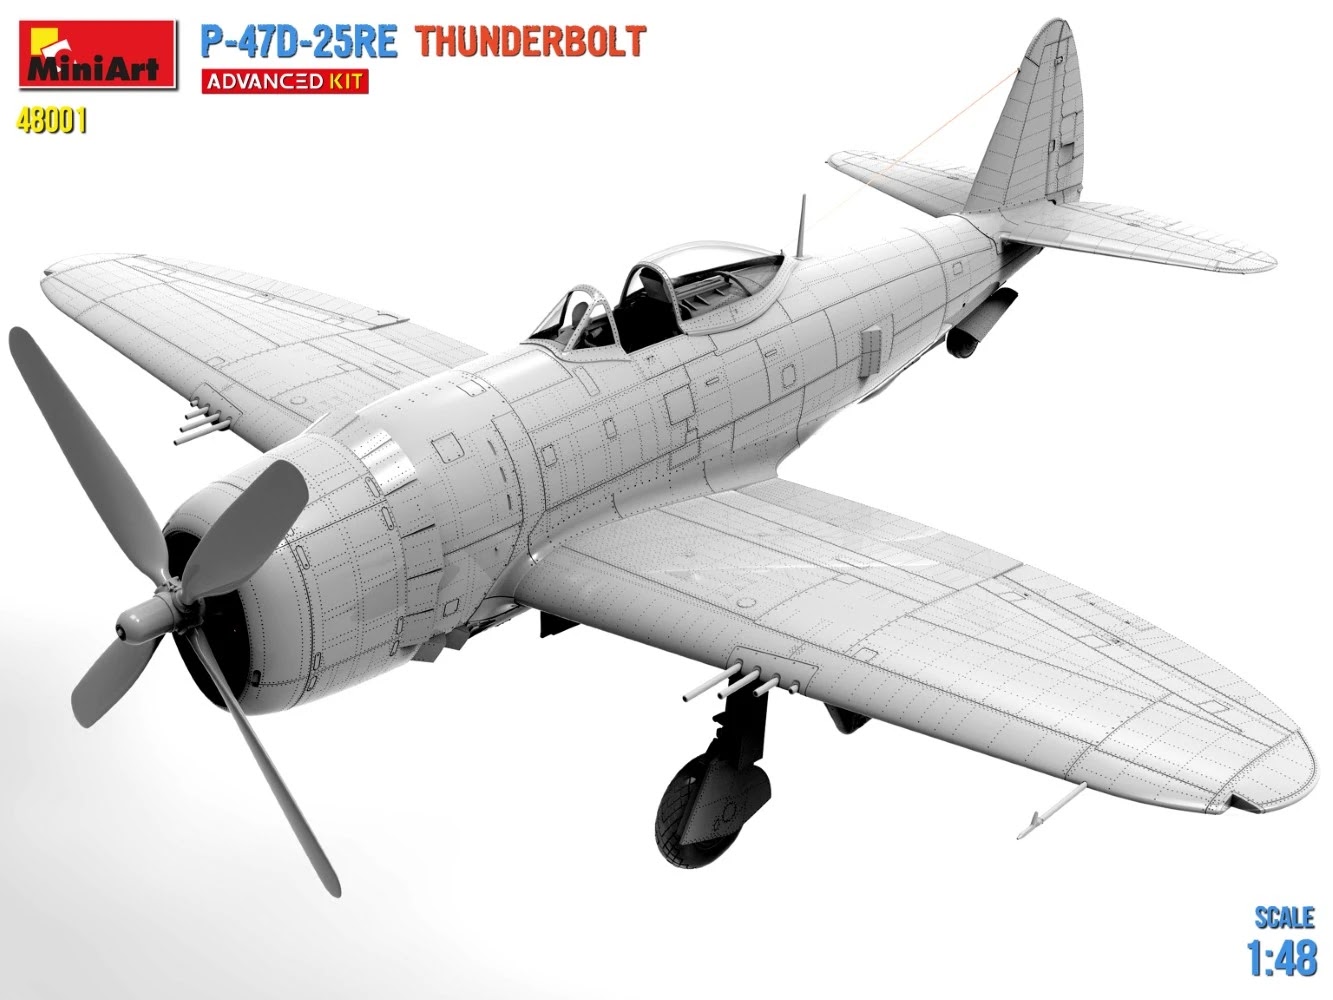 MiniArt ups the detail on their P-47D CAD-2